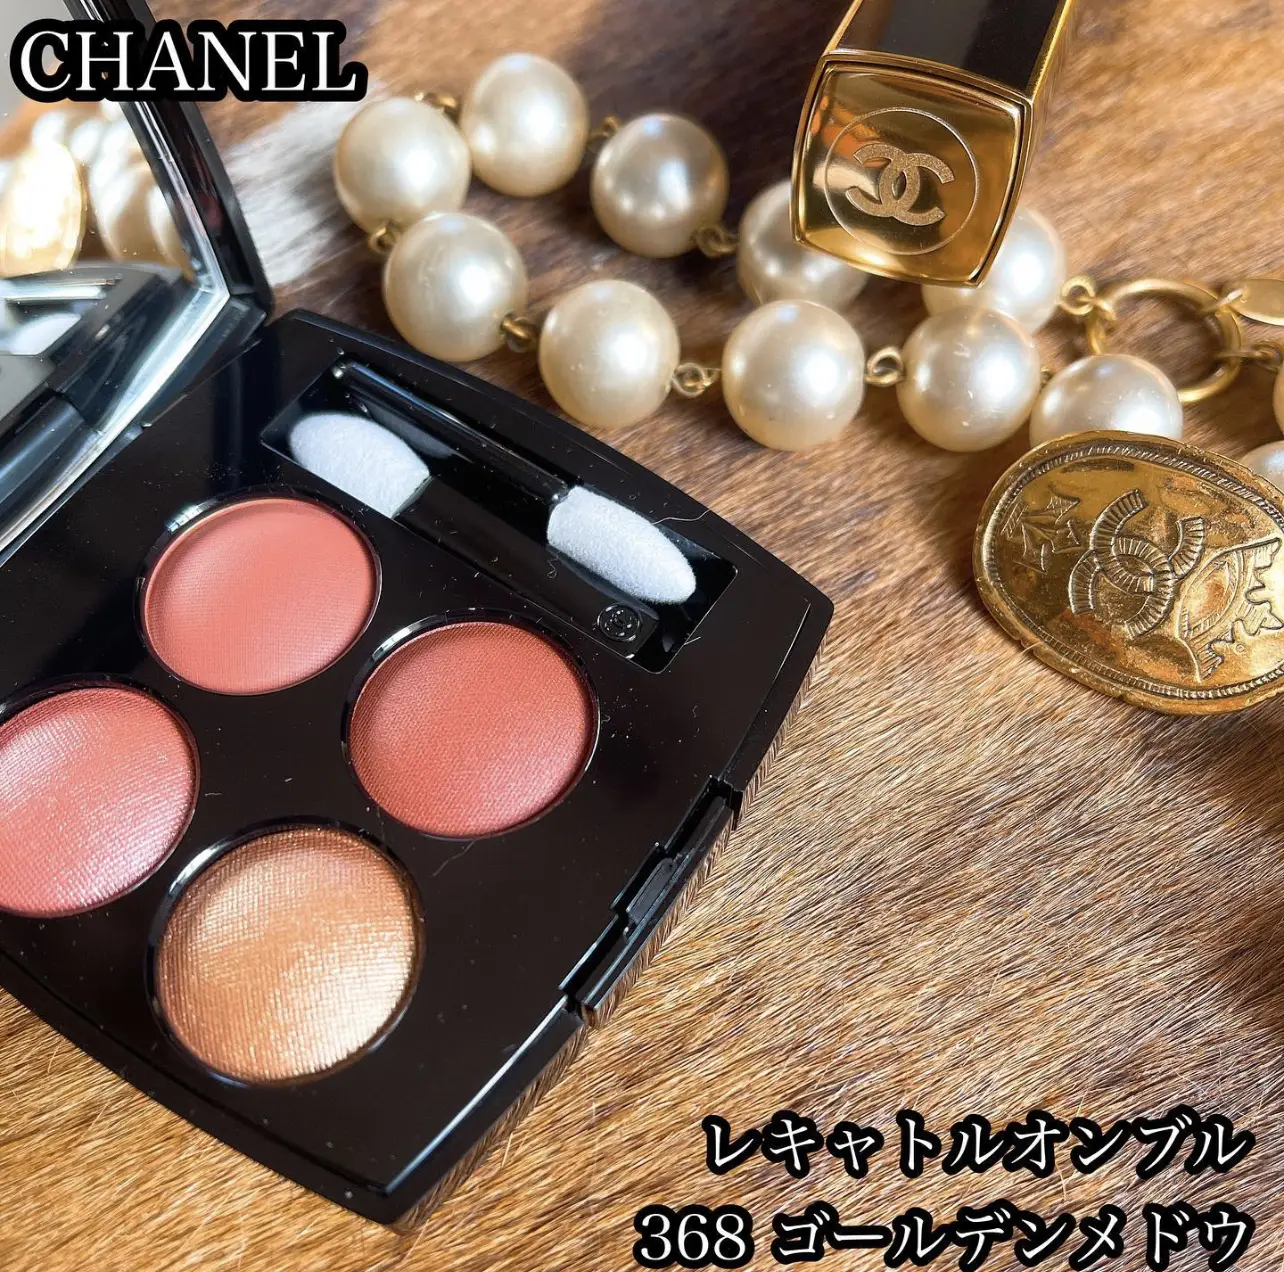 CHANEL MAKEUP, Gallery posted by chamaru222